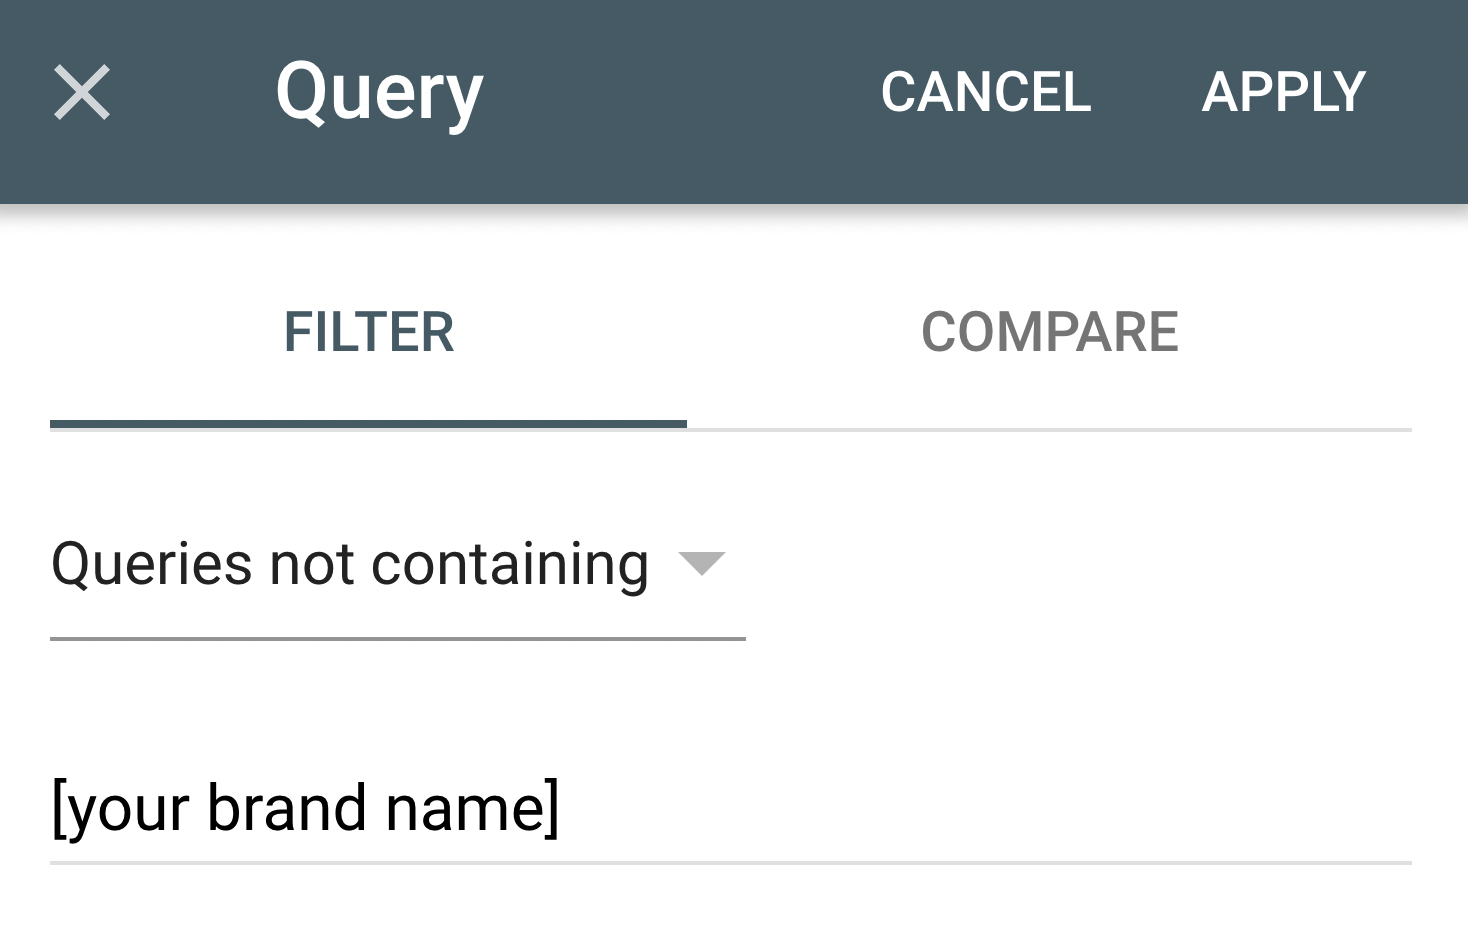 Queries not containing filter